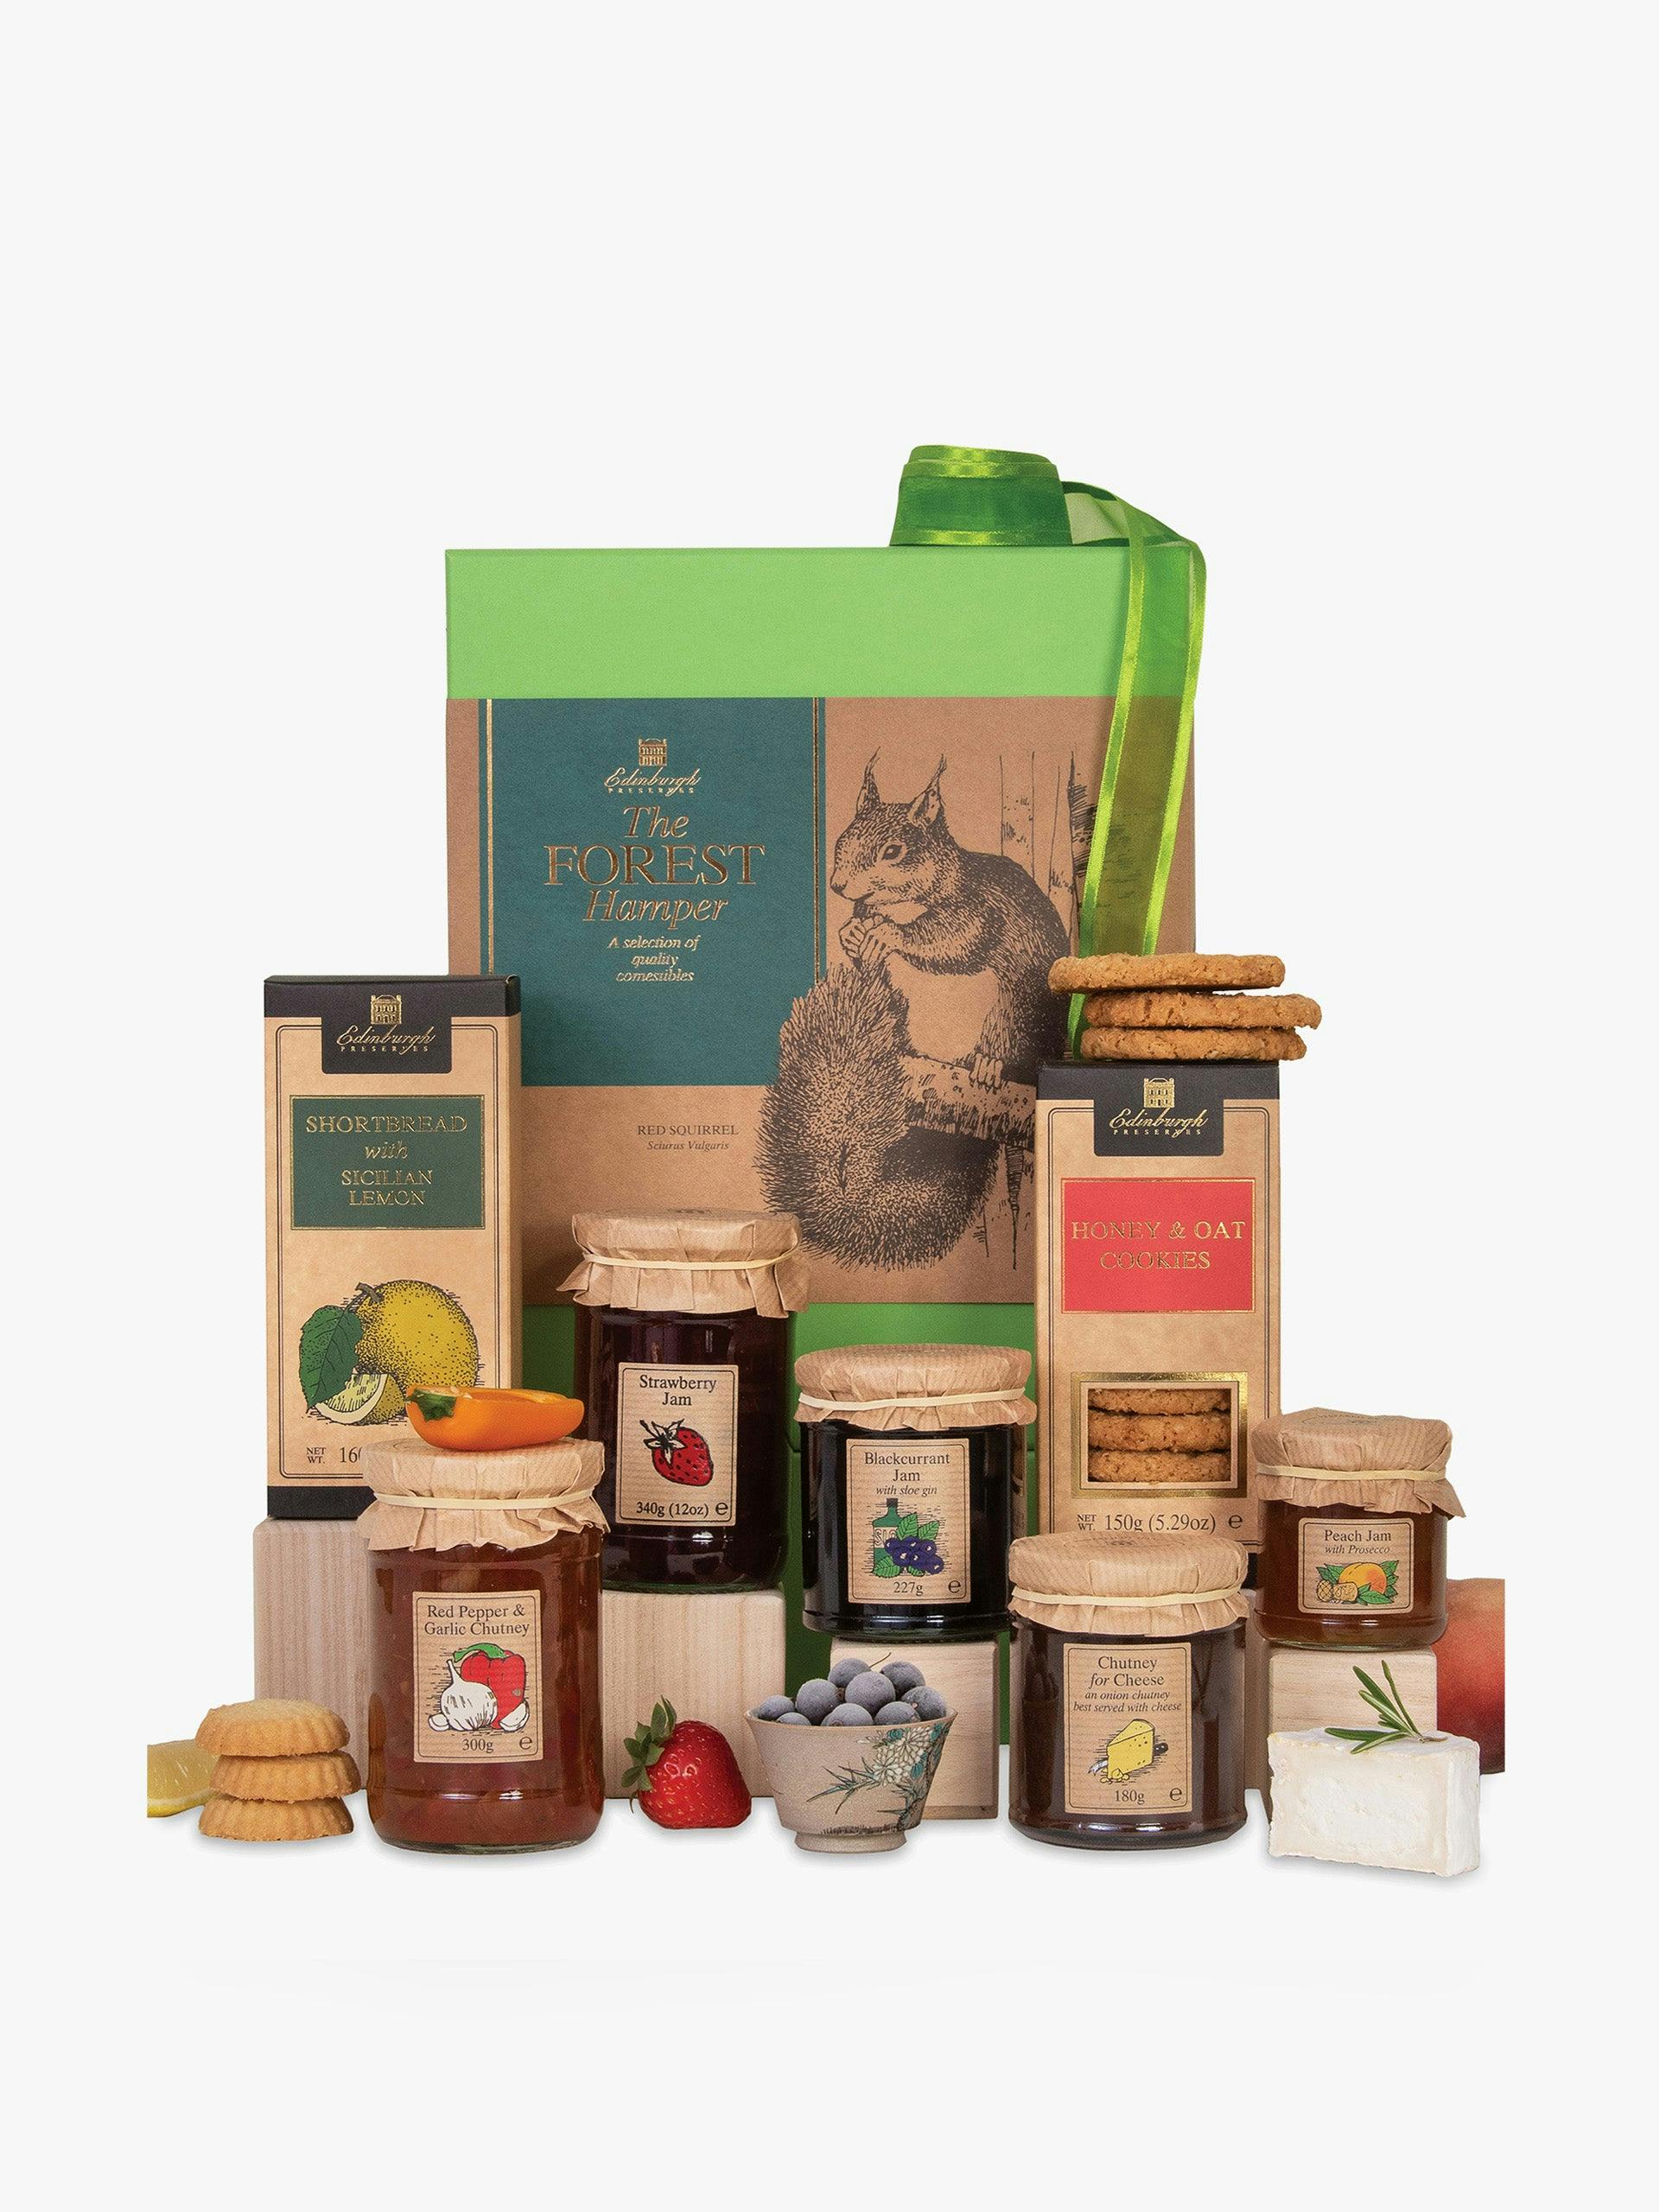 The Forest hamper